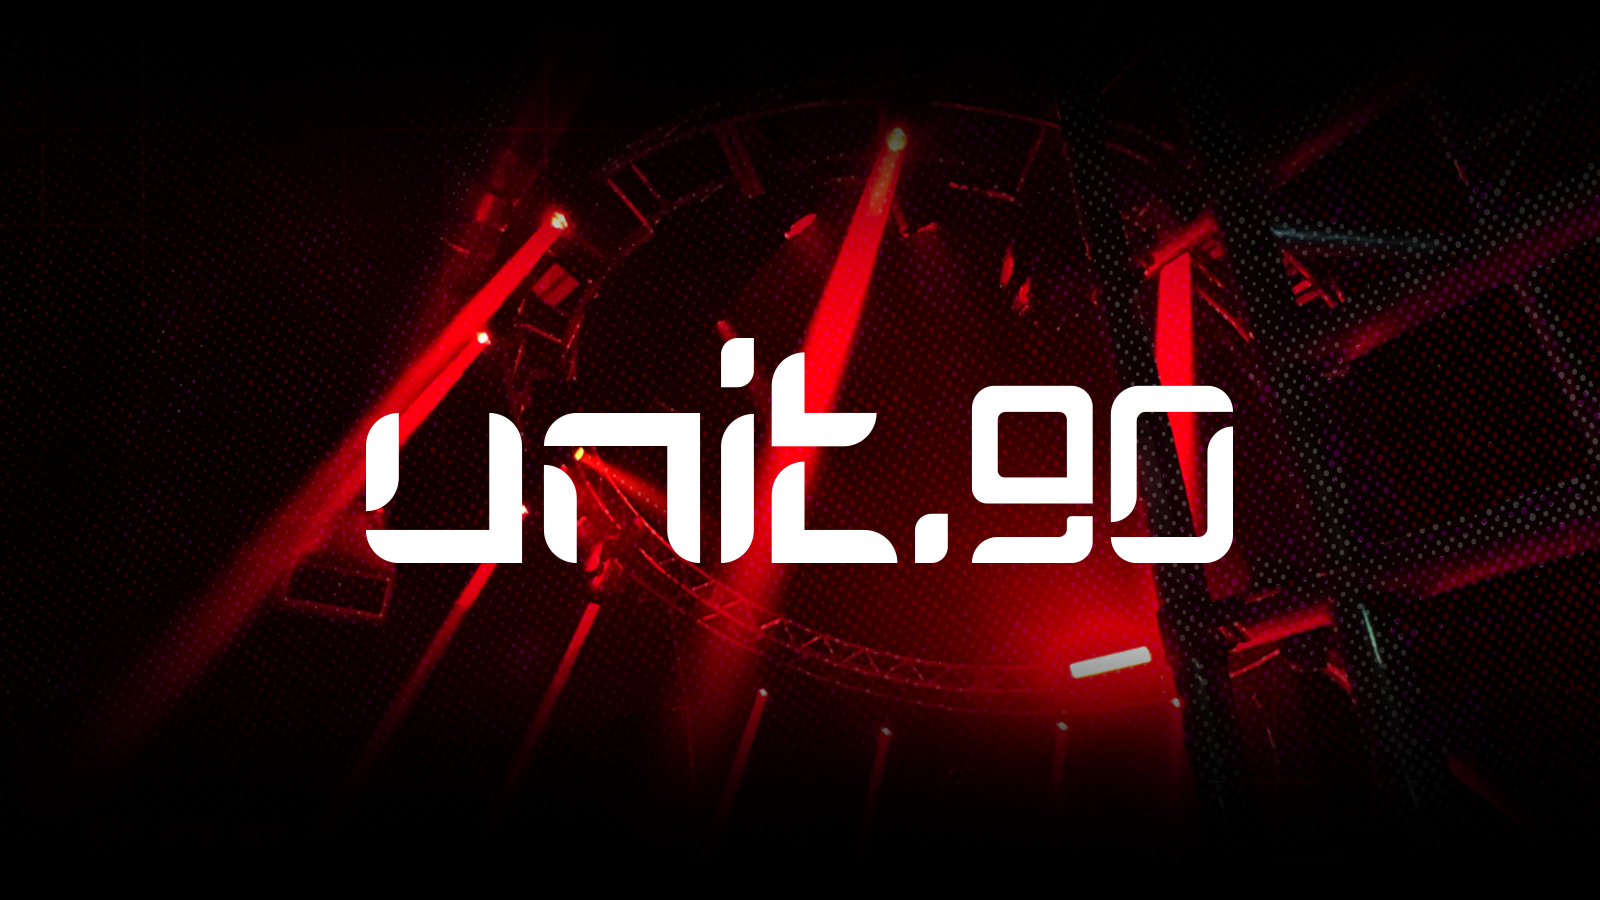 UNIT.90 ♦️ ON SALE SUNDAY 7PM // 2000 CAPACITY SUPERCLUB // 2 ARENAS OF MUSIC // £2.50 DOUBLES ALL NIGHT